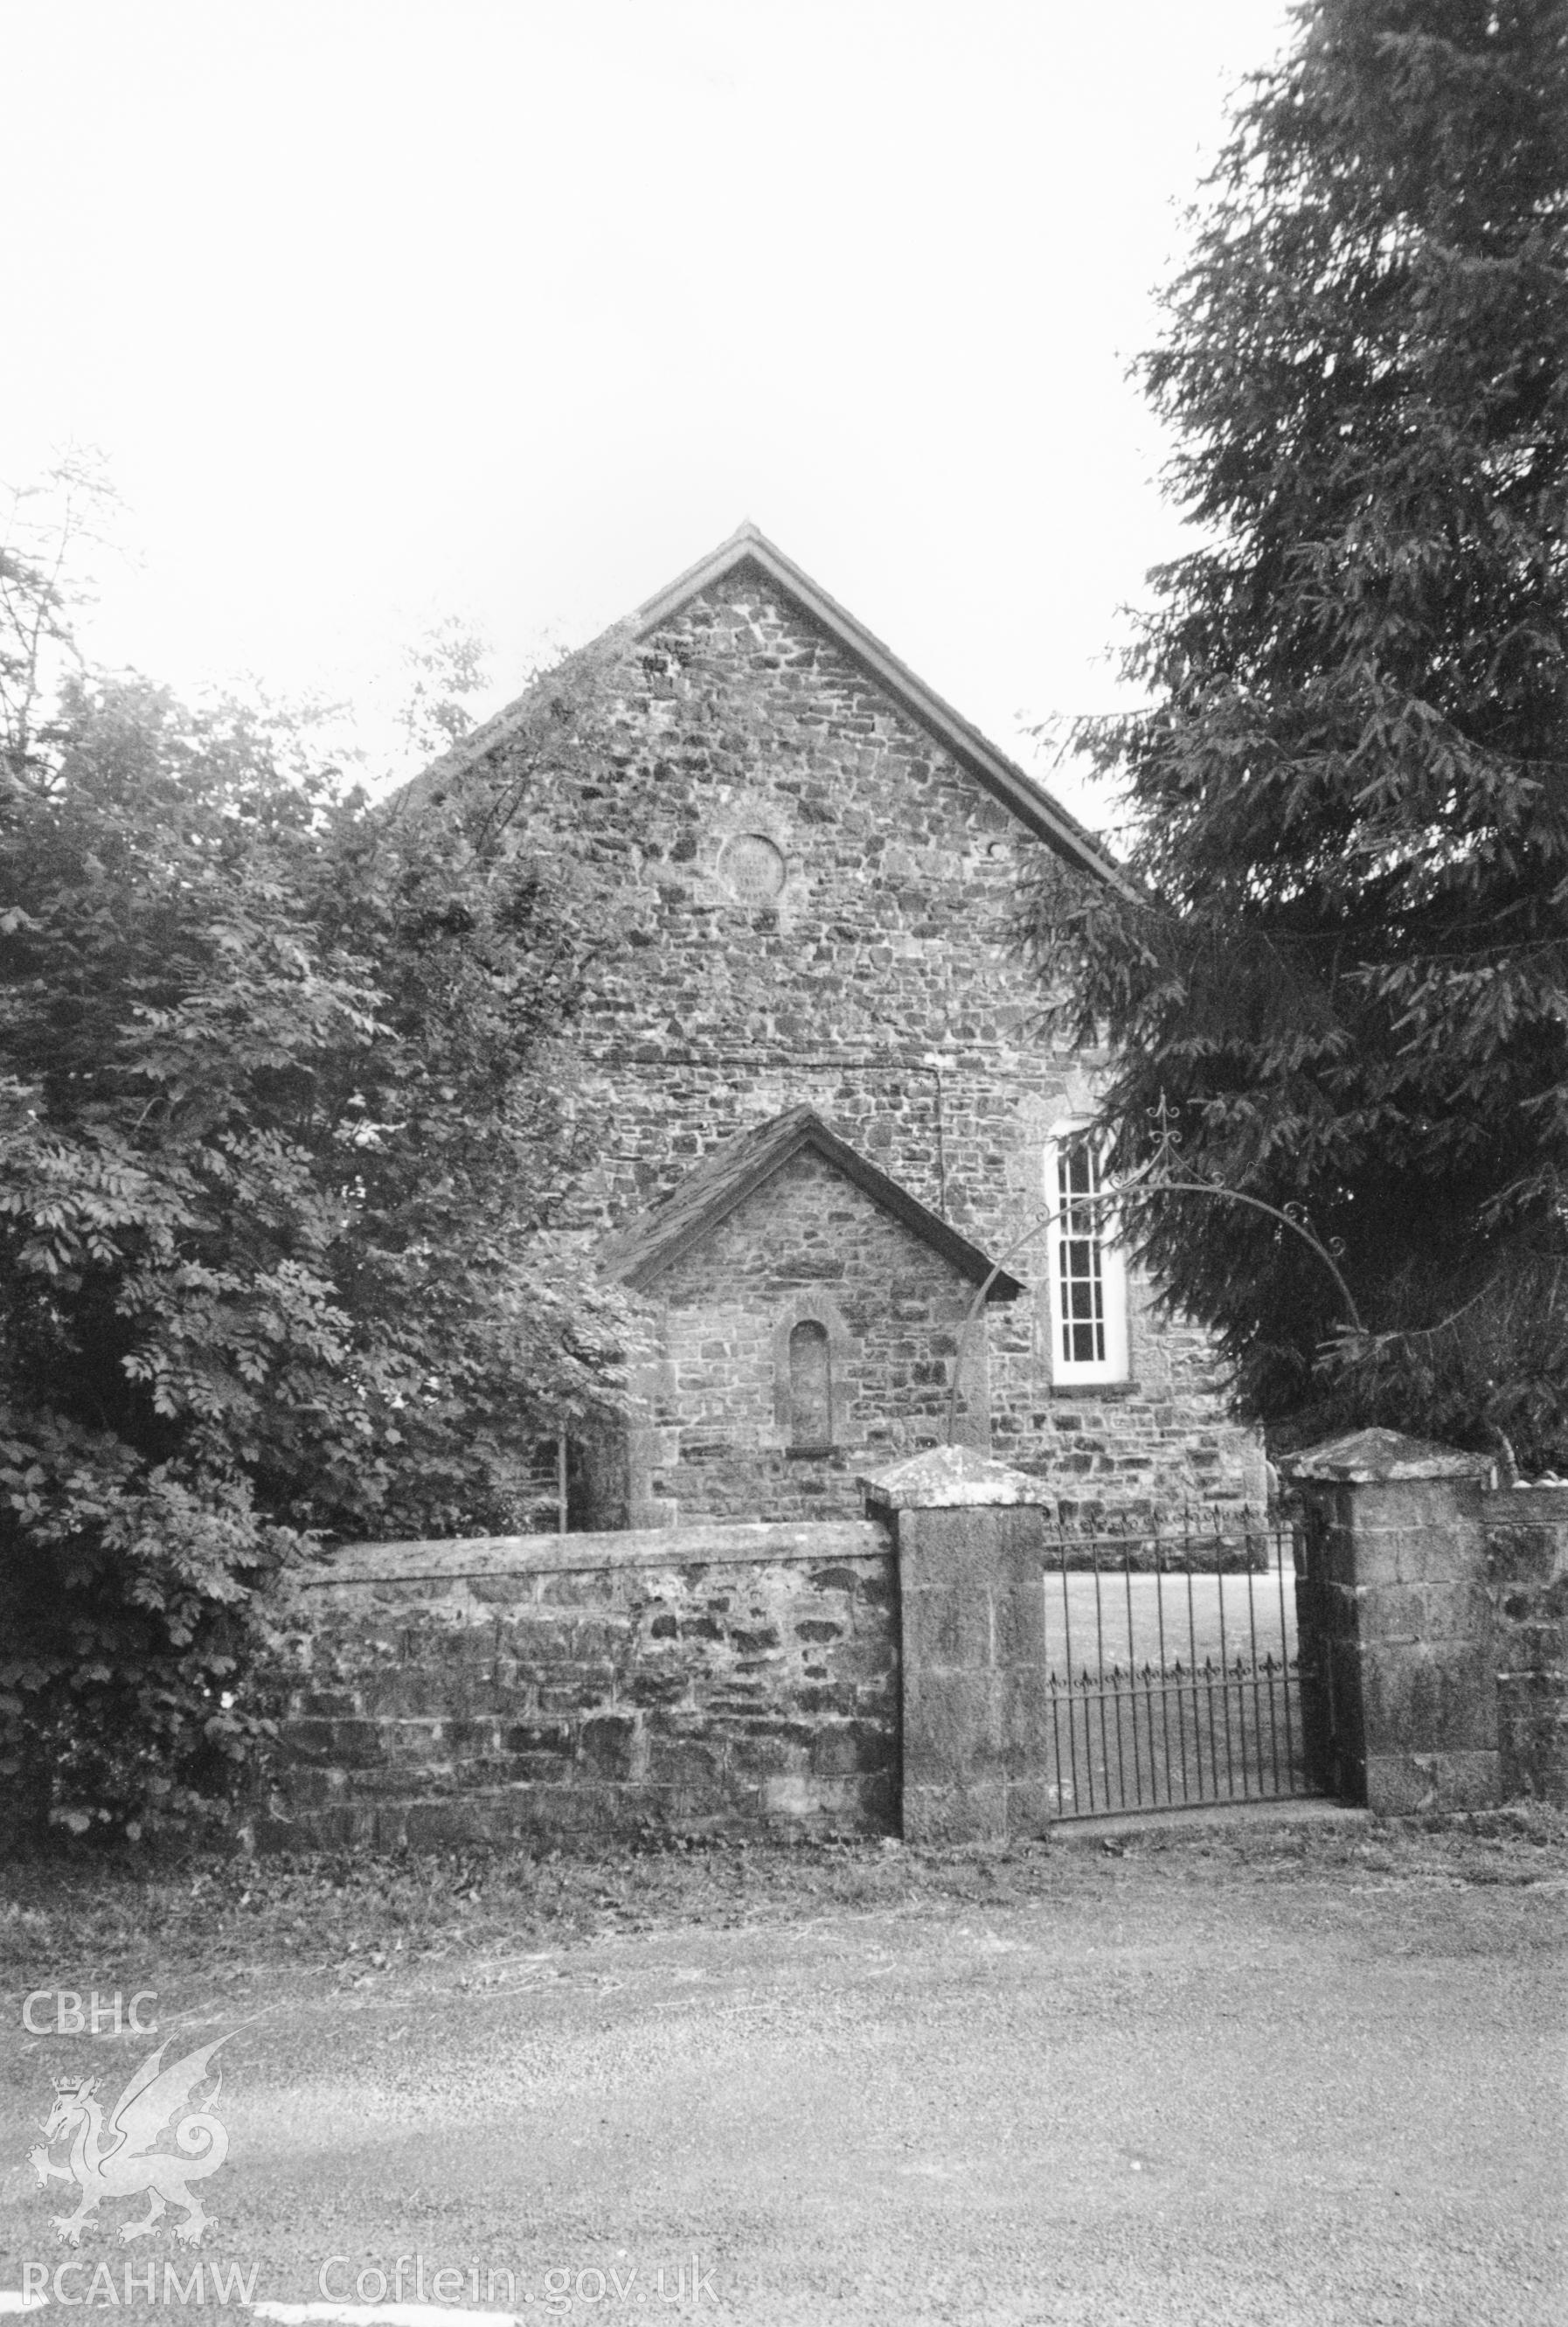 Digital copy of a black and white photograph showing an exterior view of Millin Cross Calvinistic Methodist Chapel,  taken by Robert Scourfield, c.1996.